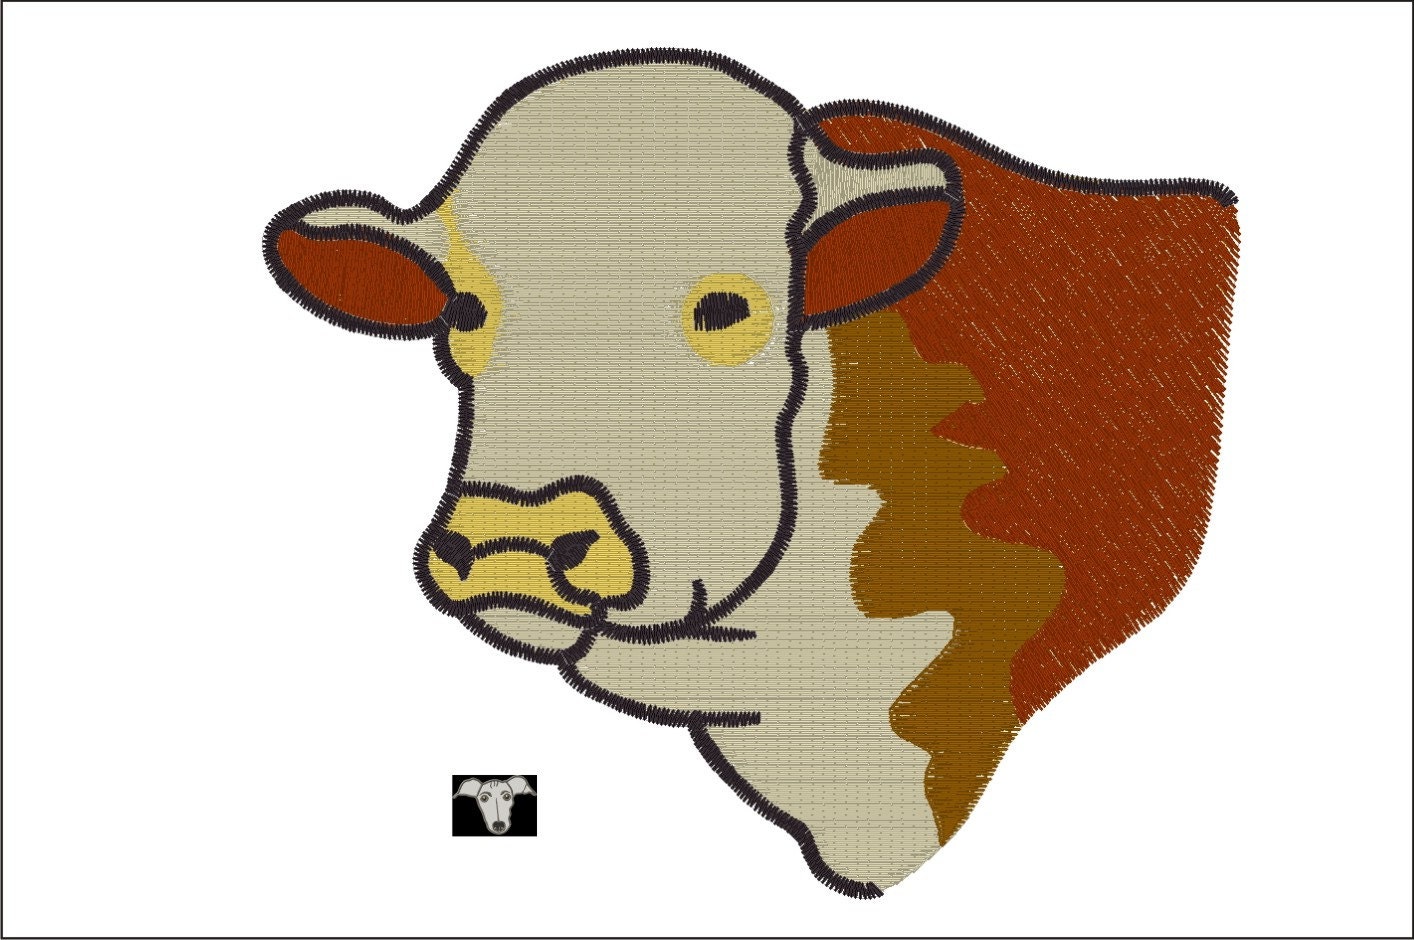 Download Hereford Cow Embroidery Designs in 4 sizes